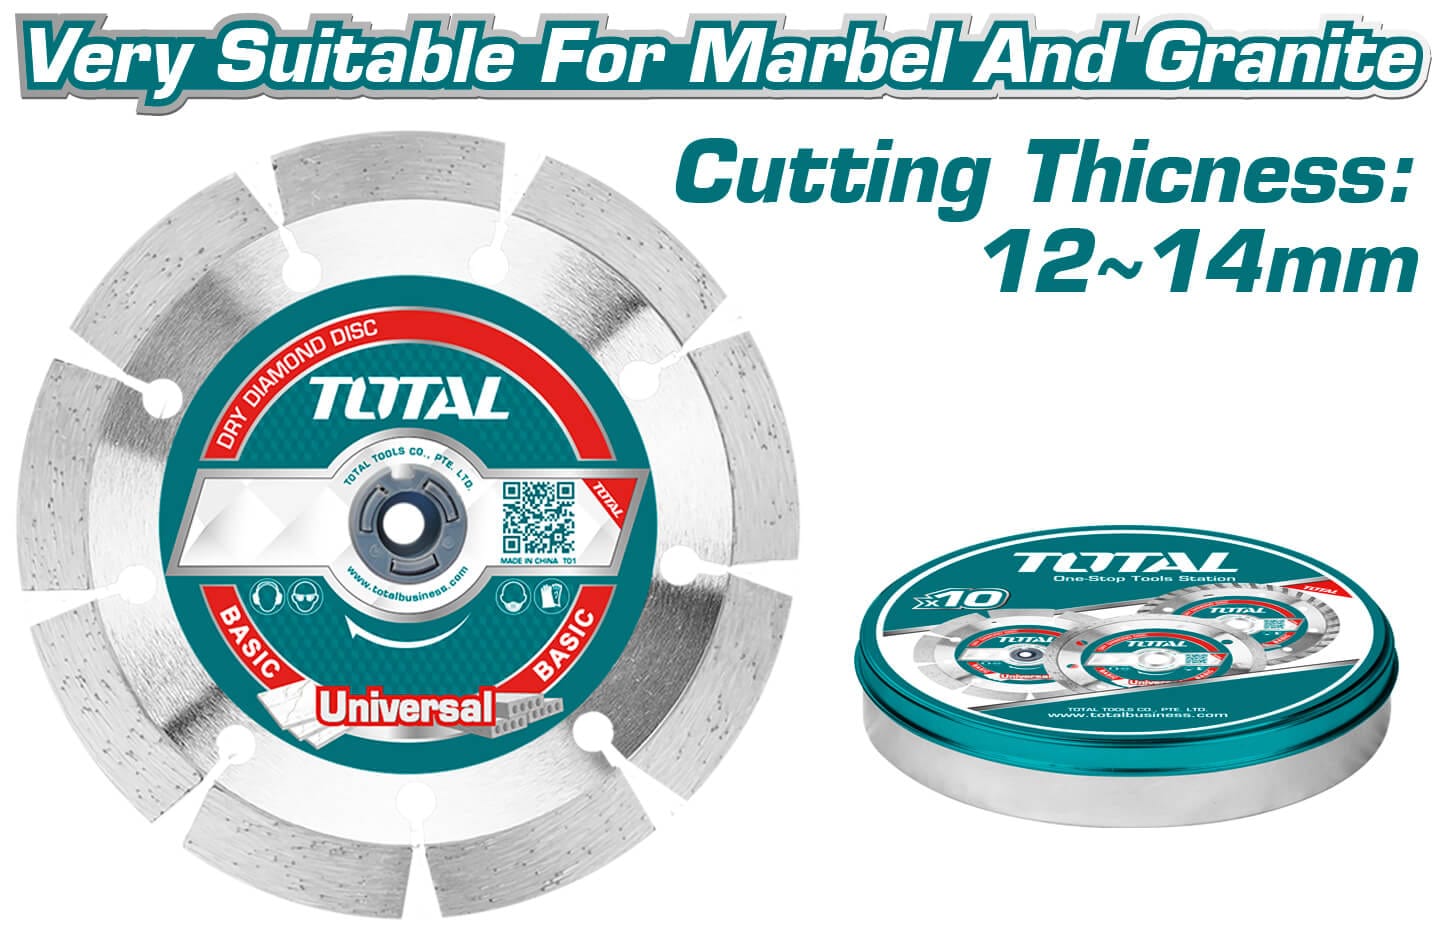 Total Dry Diamond Disc 9'' - TAC21123033 | Supply Master | Accra, Ghana Grinding & Cutting Wheels Buy Tools hardware Building materials